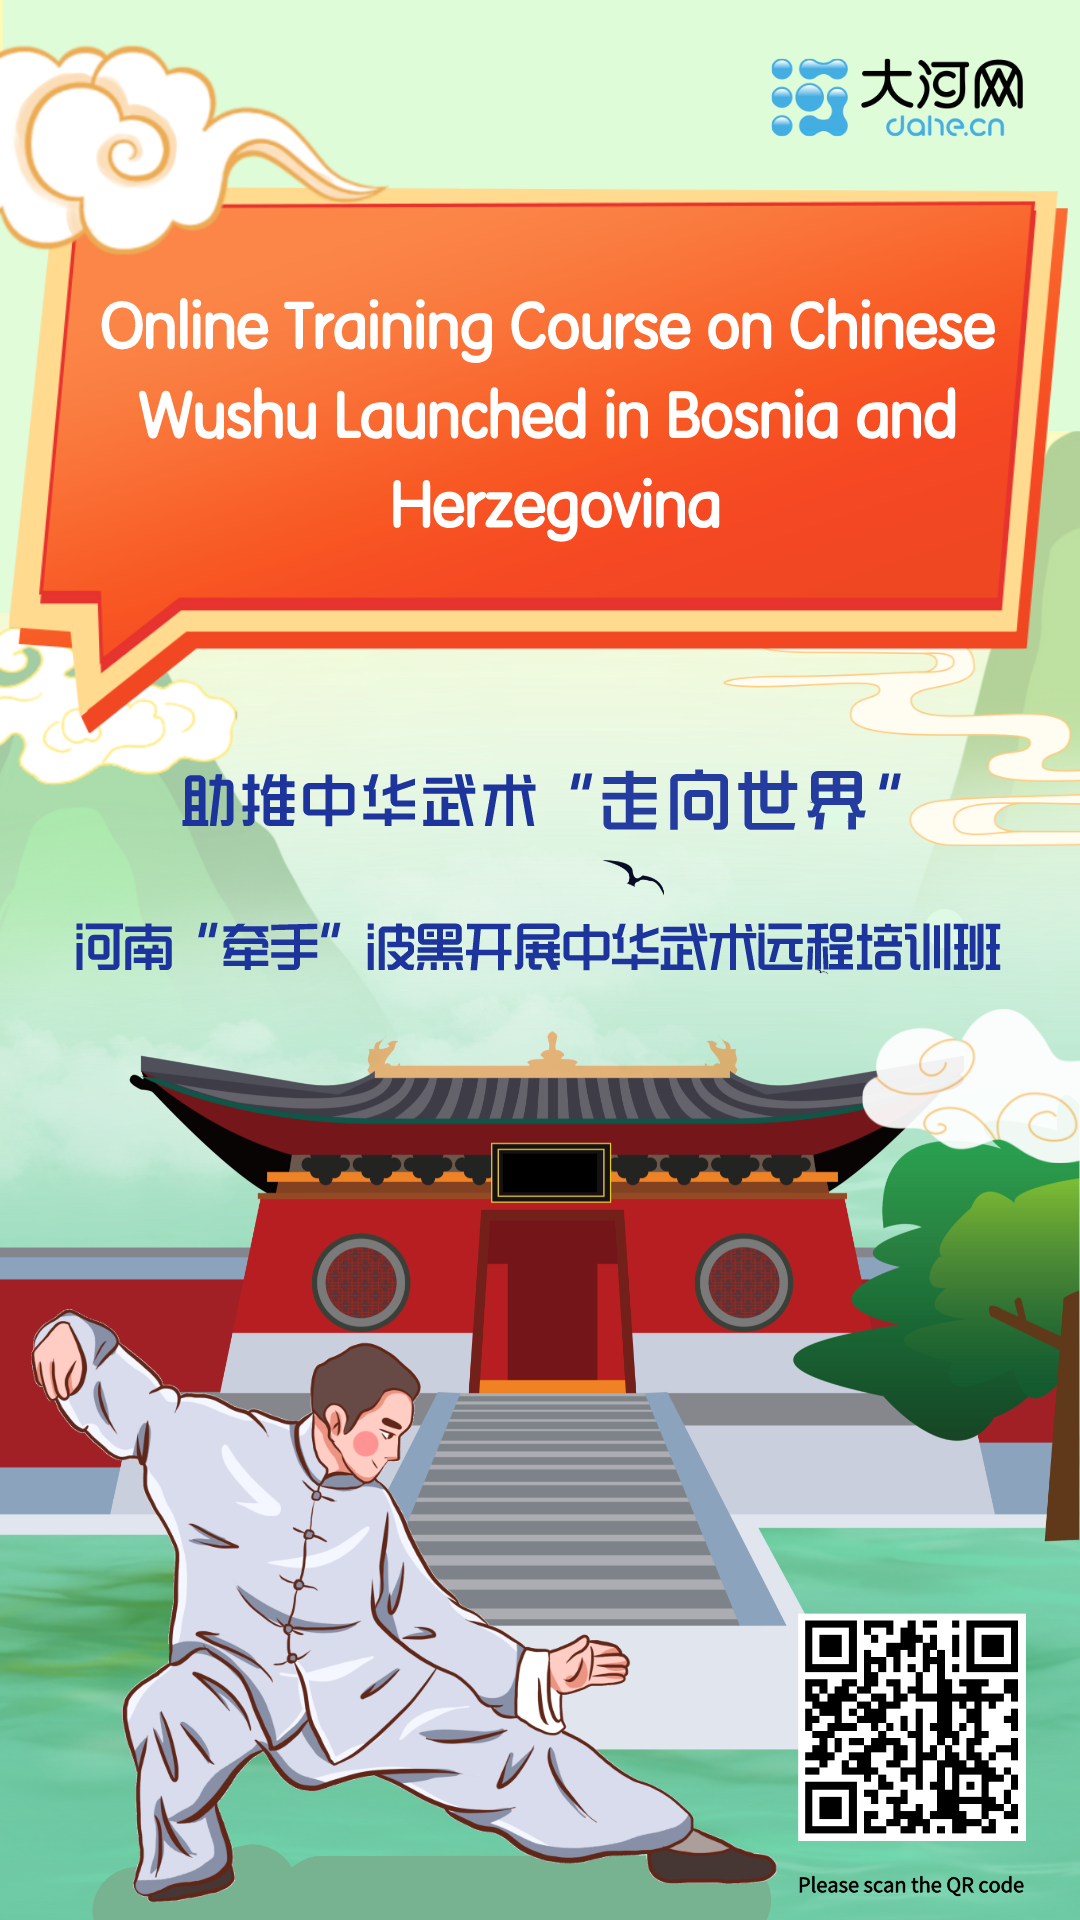 Online Training Course on Chinese Wushu Launched in Bosnia and Herzegovina